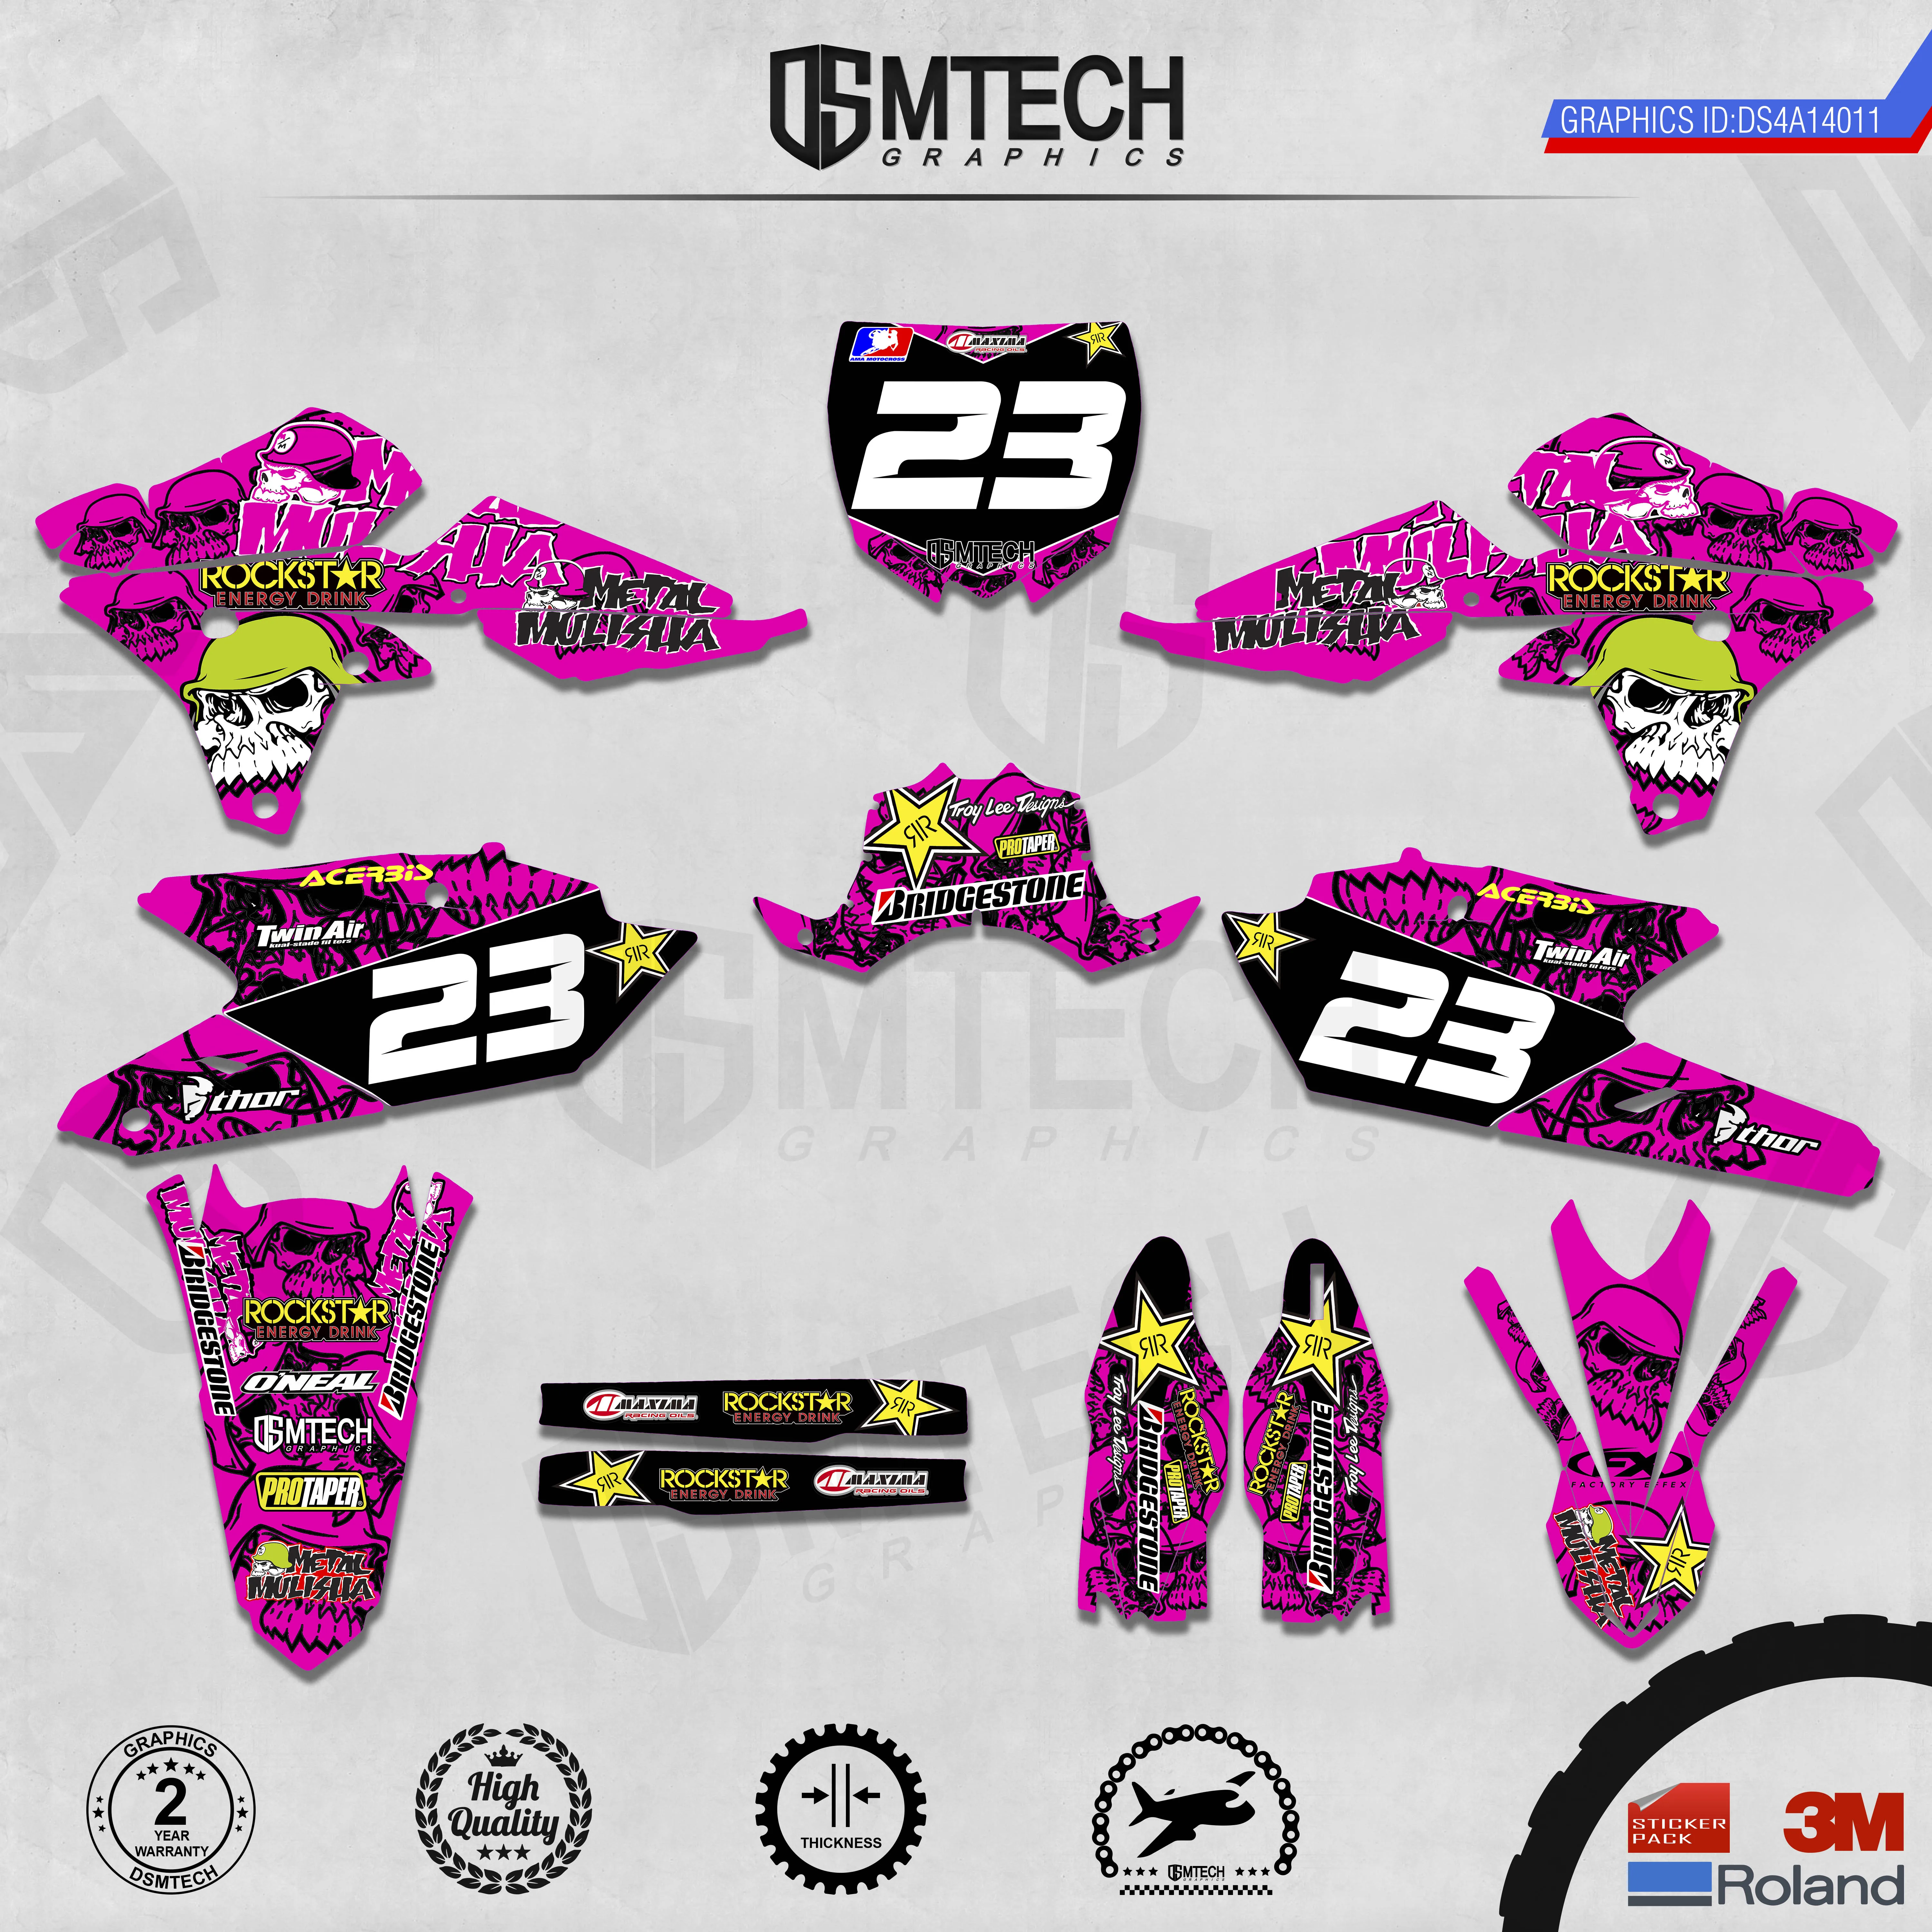 DSMTECH Customized  Team Graphics Backgrounds Decals 3M Custom Stickers For 14-18 YZ250F 15-19 YZ250FX WRF250 14-17 YZ450F  011